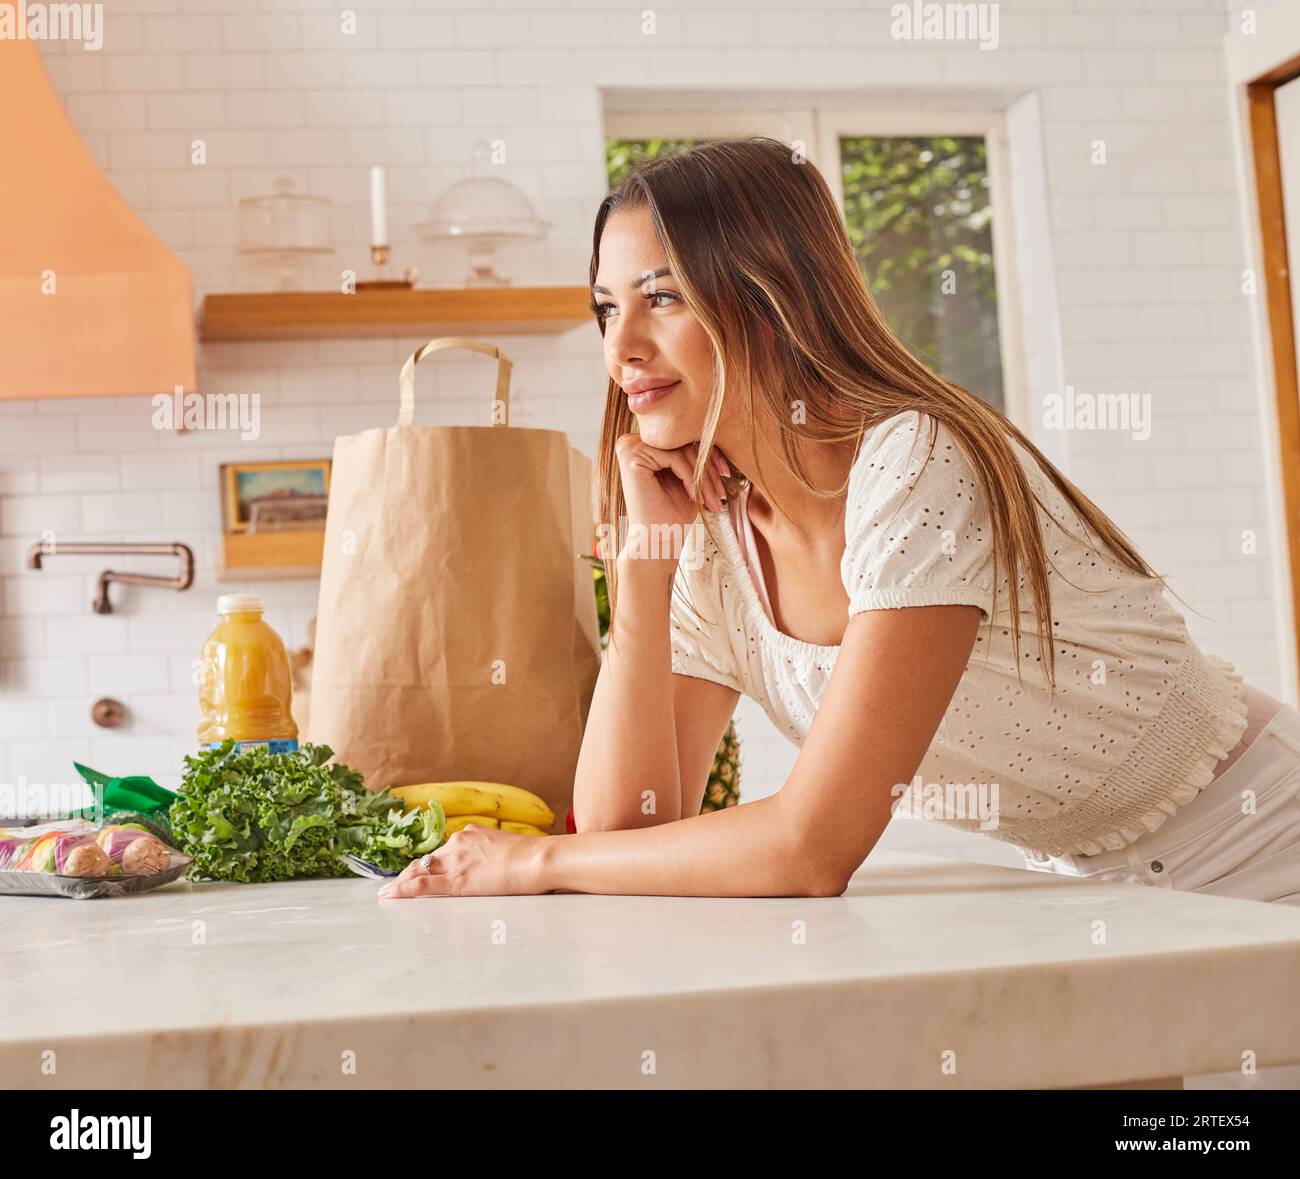 Smiling woman with paper shopping bag and groceries in kitchen Stock Photo